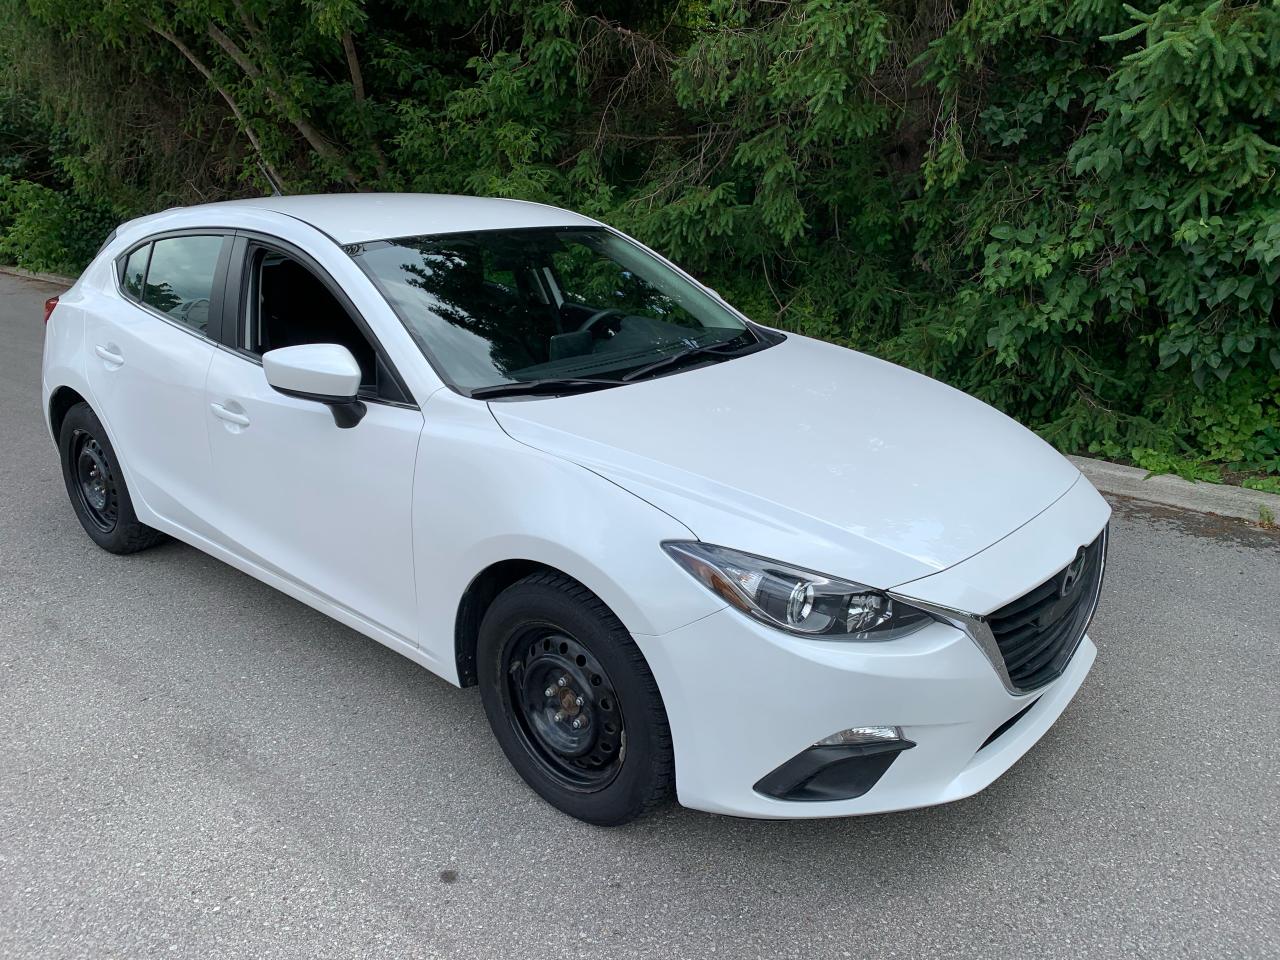 2015 Mazda MAZDA3 GS SPORT HB-ONLY 59,053KMS!! 1 LOCAL FEMALE OWNER! - Photo #1